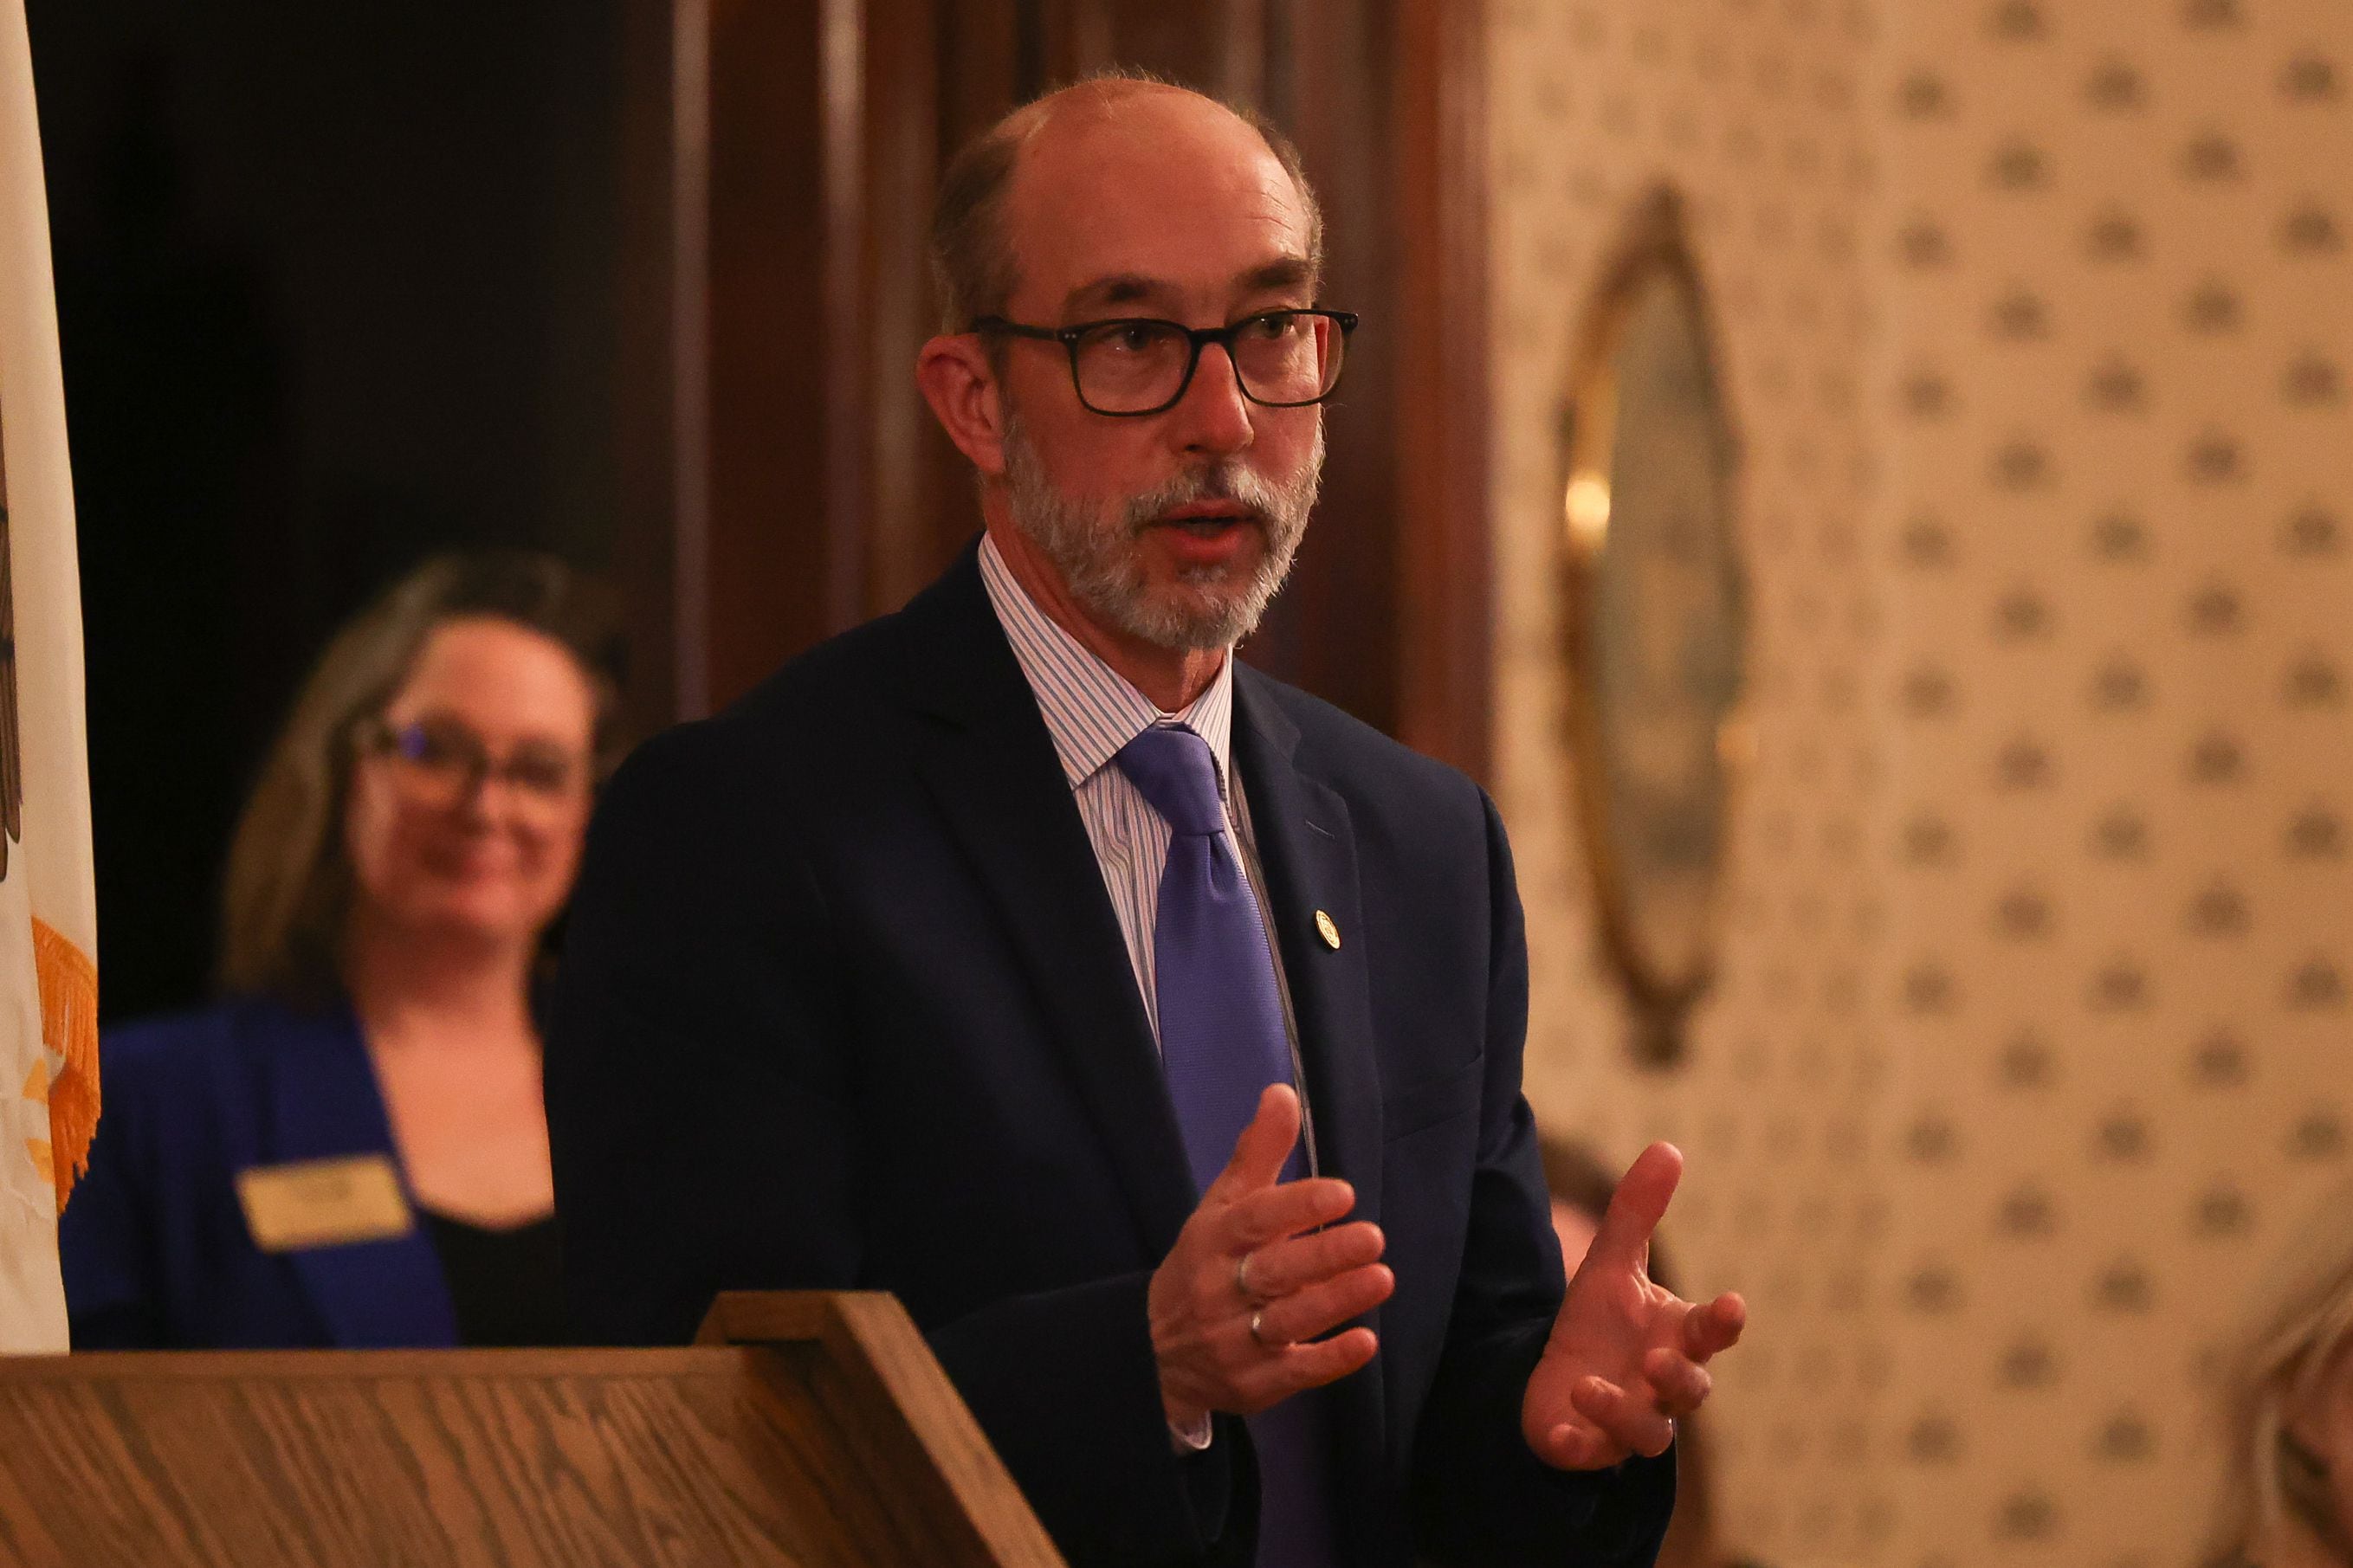 Dr. Robert McBride Jr, Lockport Township High School Superintendent, speaks at a United Way private event at the Jacob Henry Mansion on Thursday, February 23rd, 2023 in Joliet.